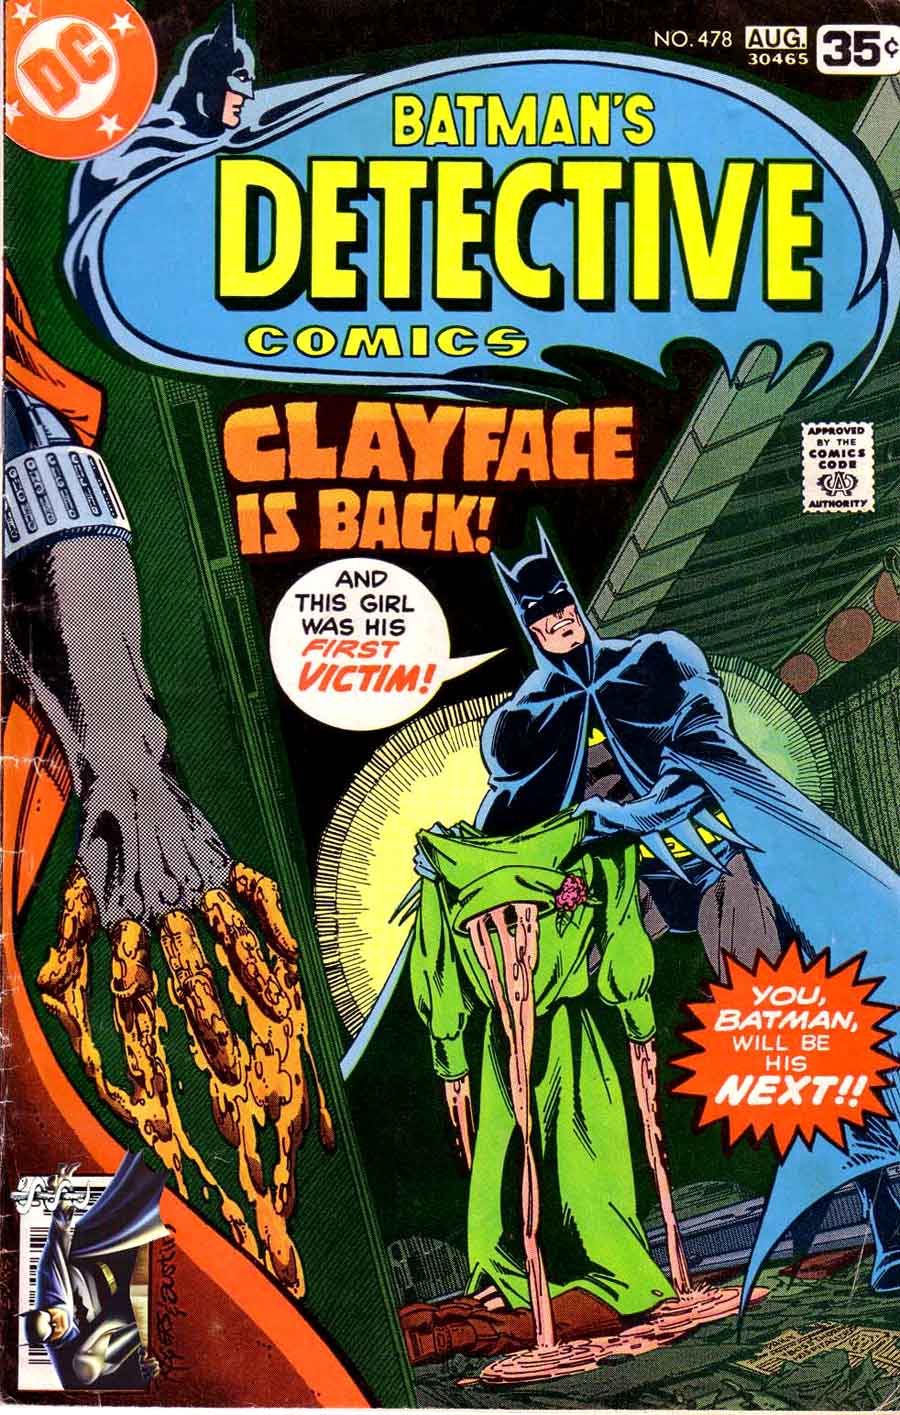 Detective Comics v1 #478 dc comic book cover art by Marshall Rogers